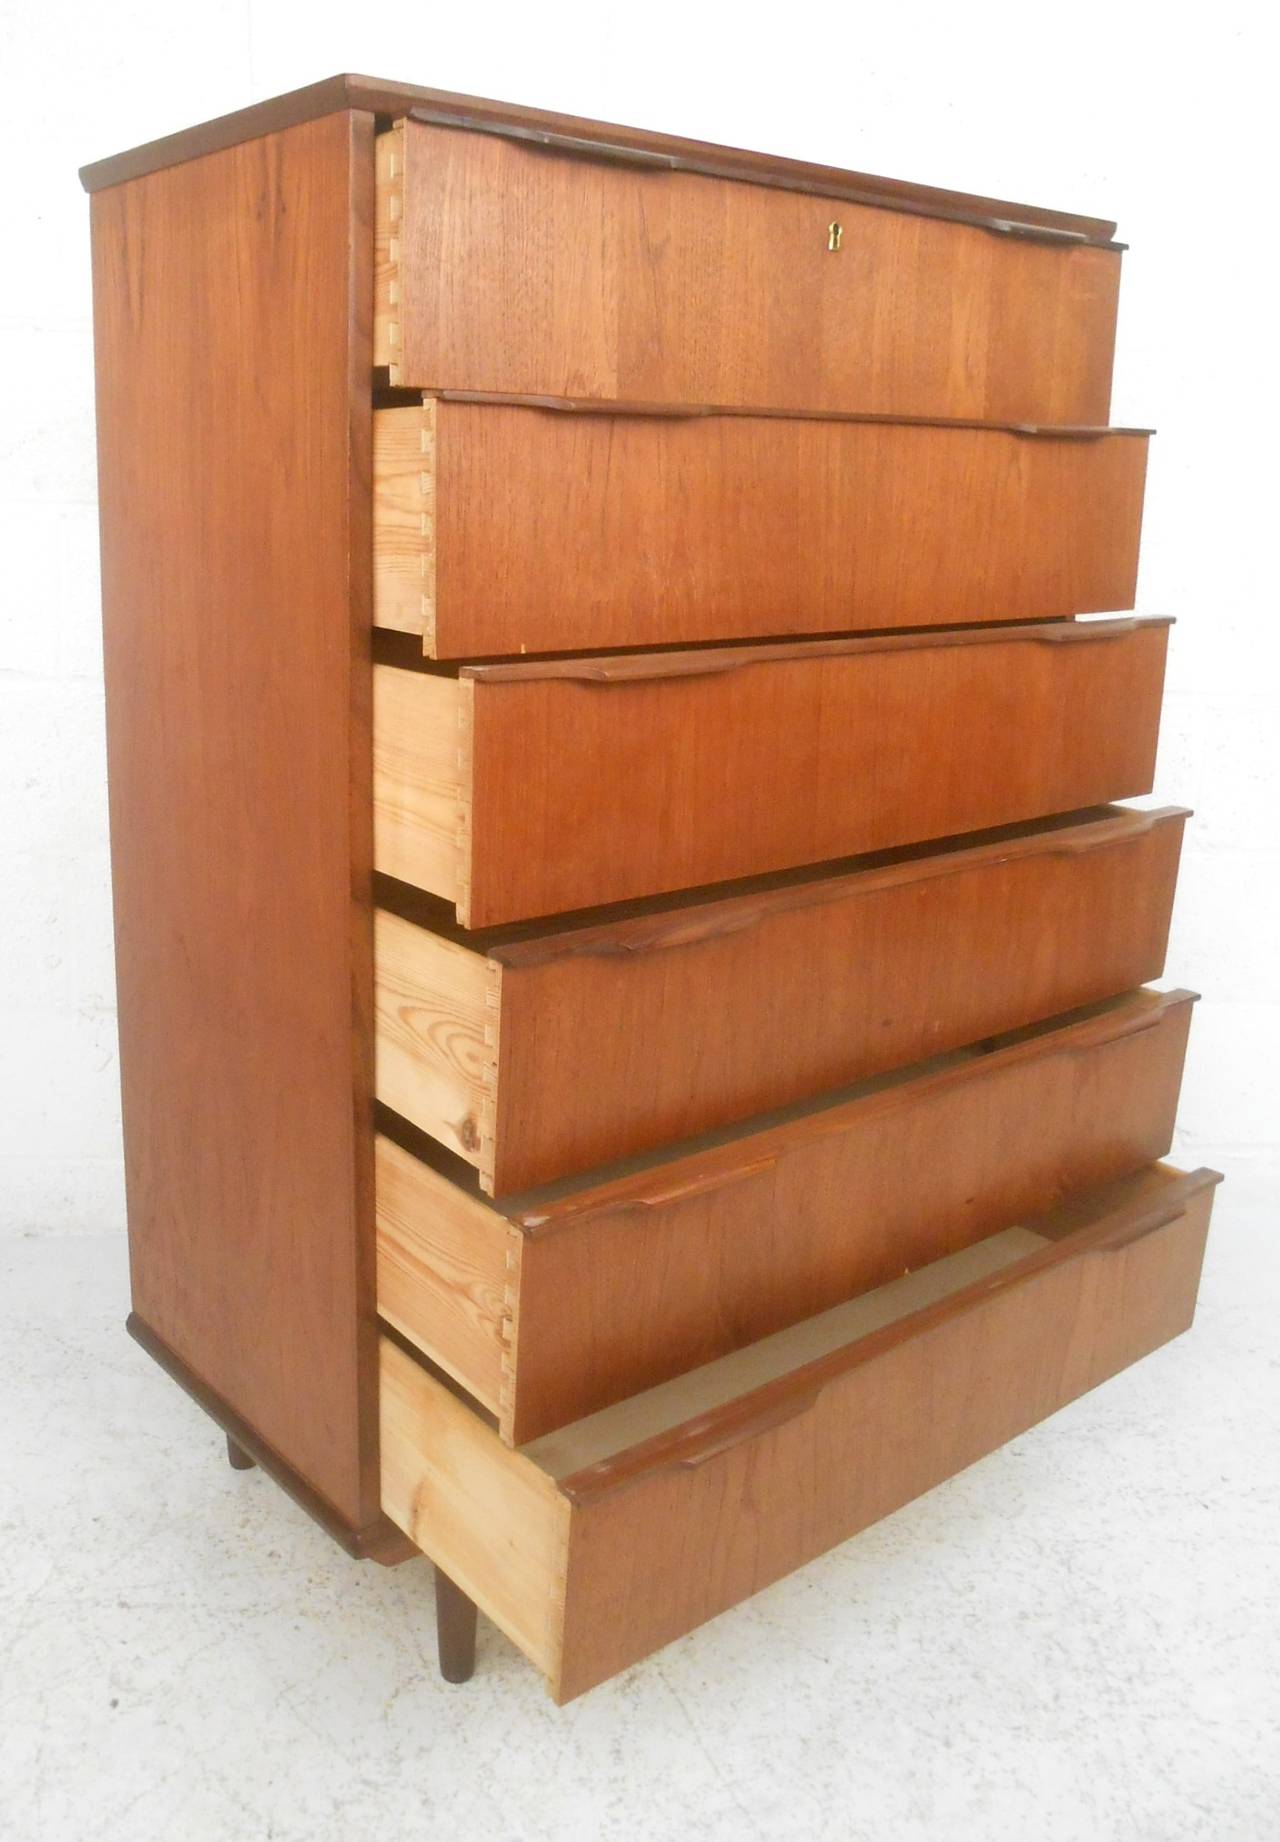 This vintage teak dresser makes a wonderful storage solution for any midcentury interior. This stylish case piece offers plenty of room for storage within its six hefty drawers. Carved drawer pulls and tapered legs add to it's charm, please confirm